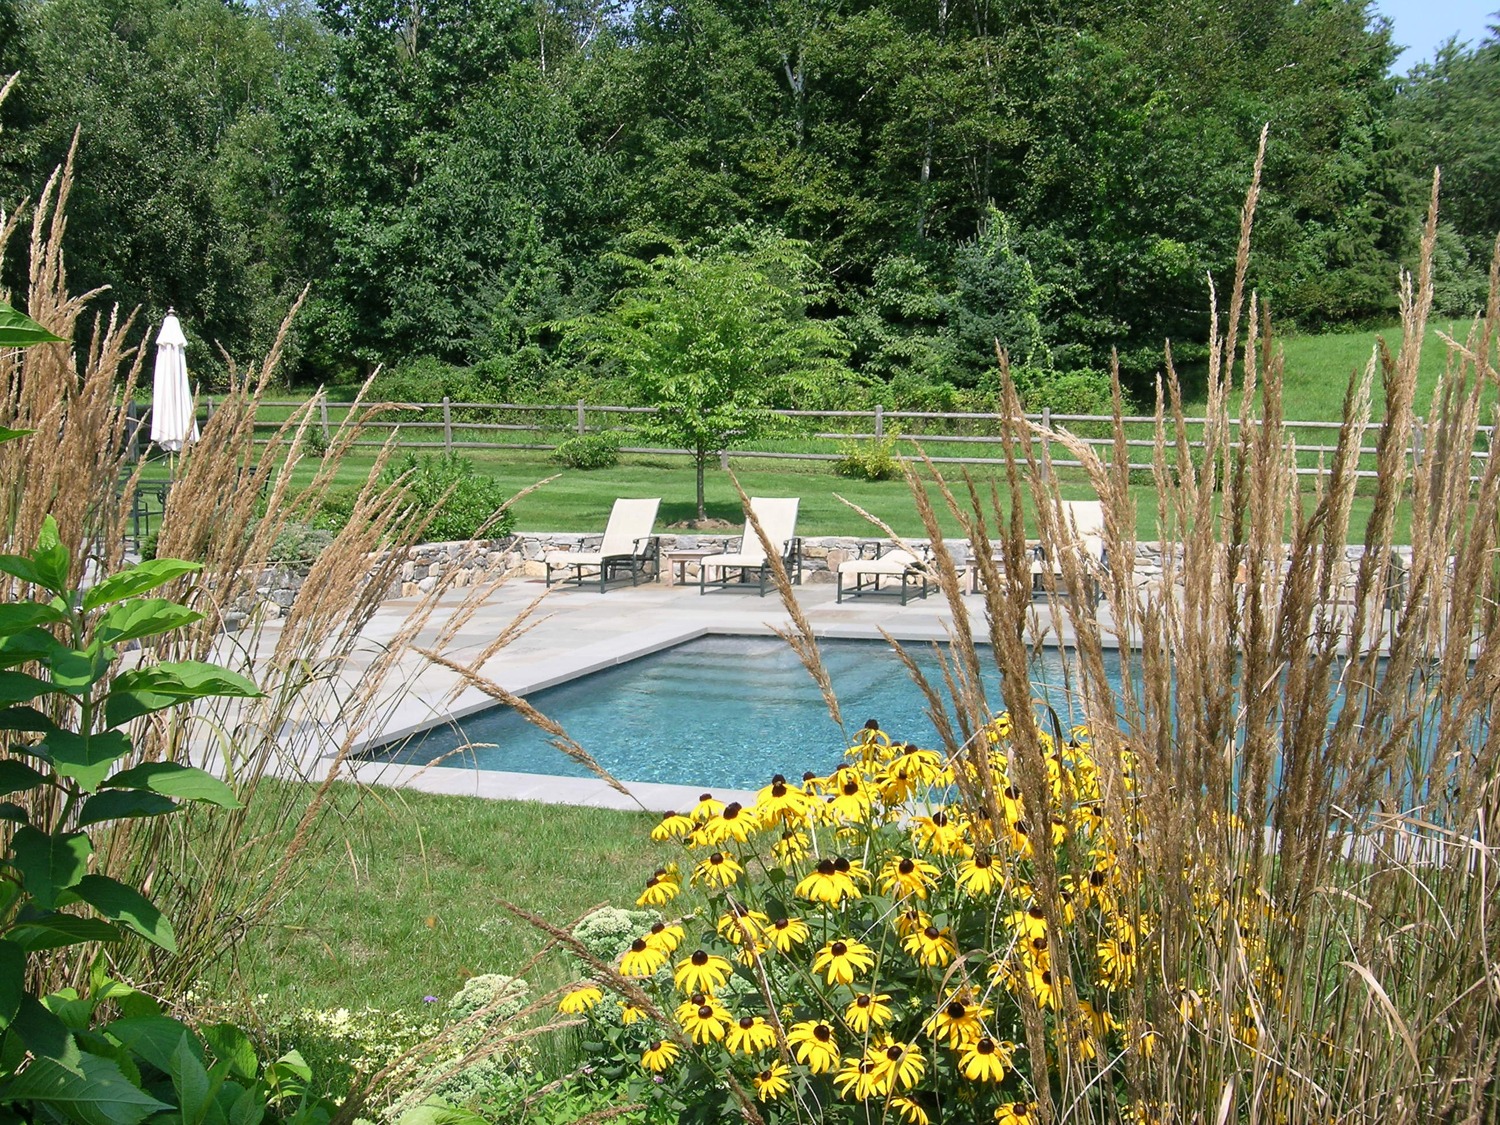 The image shows an outdoor swimming pool with lounge chairs, surrounded by greenery, flowers, and a fence, under a clear blue sky.